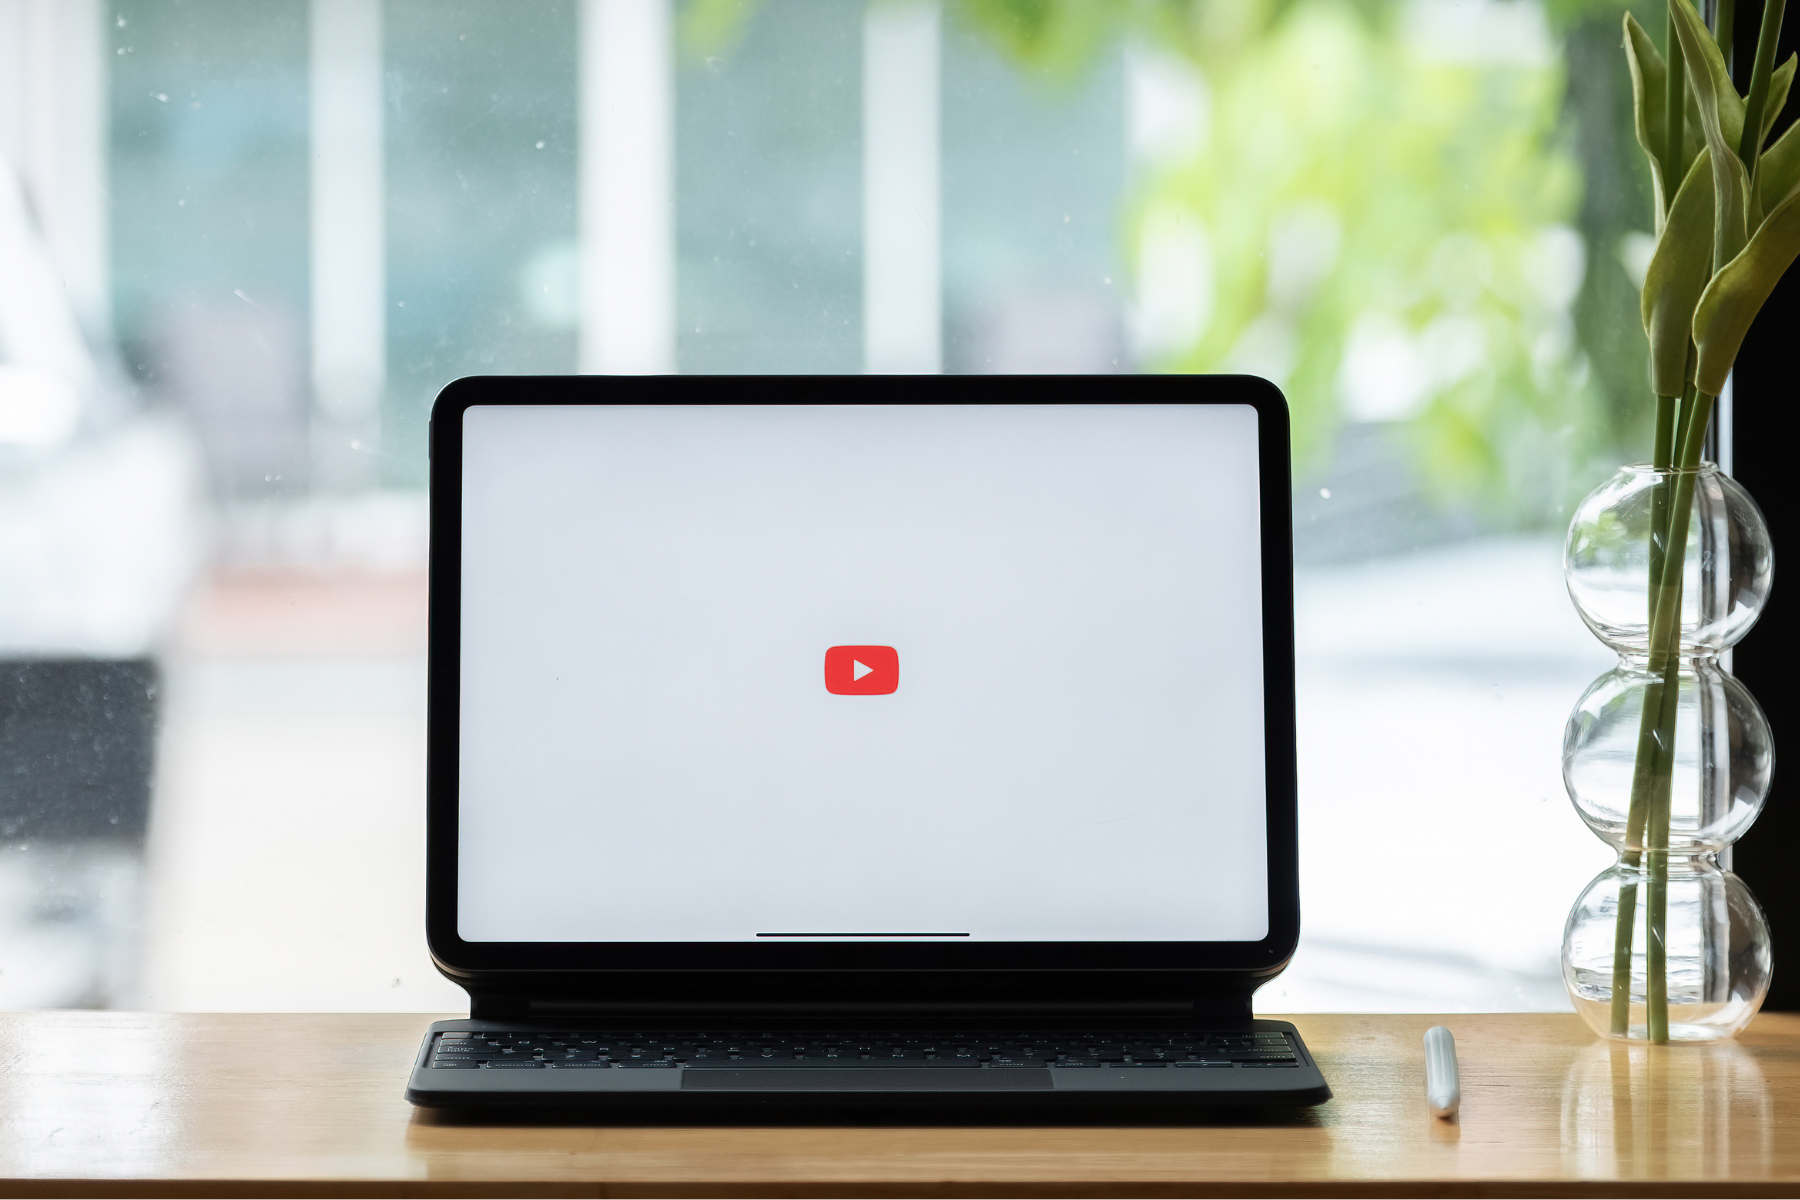 A laptop sitting in the window with the Youtube logo on the screen.